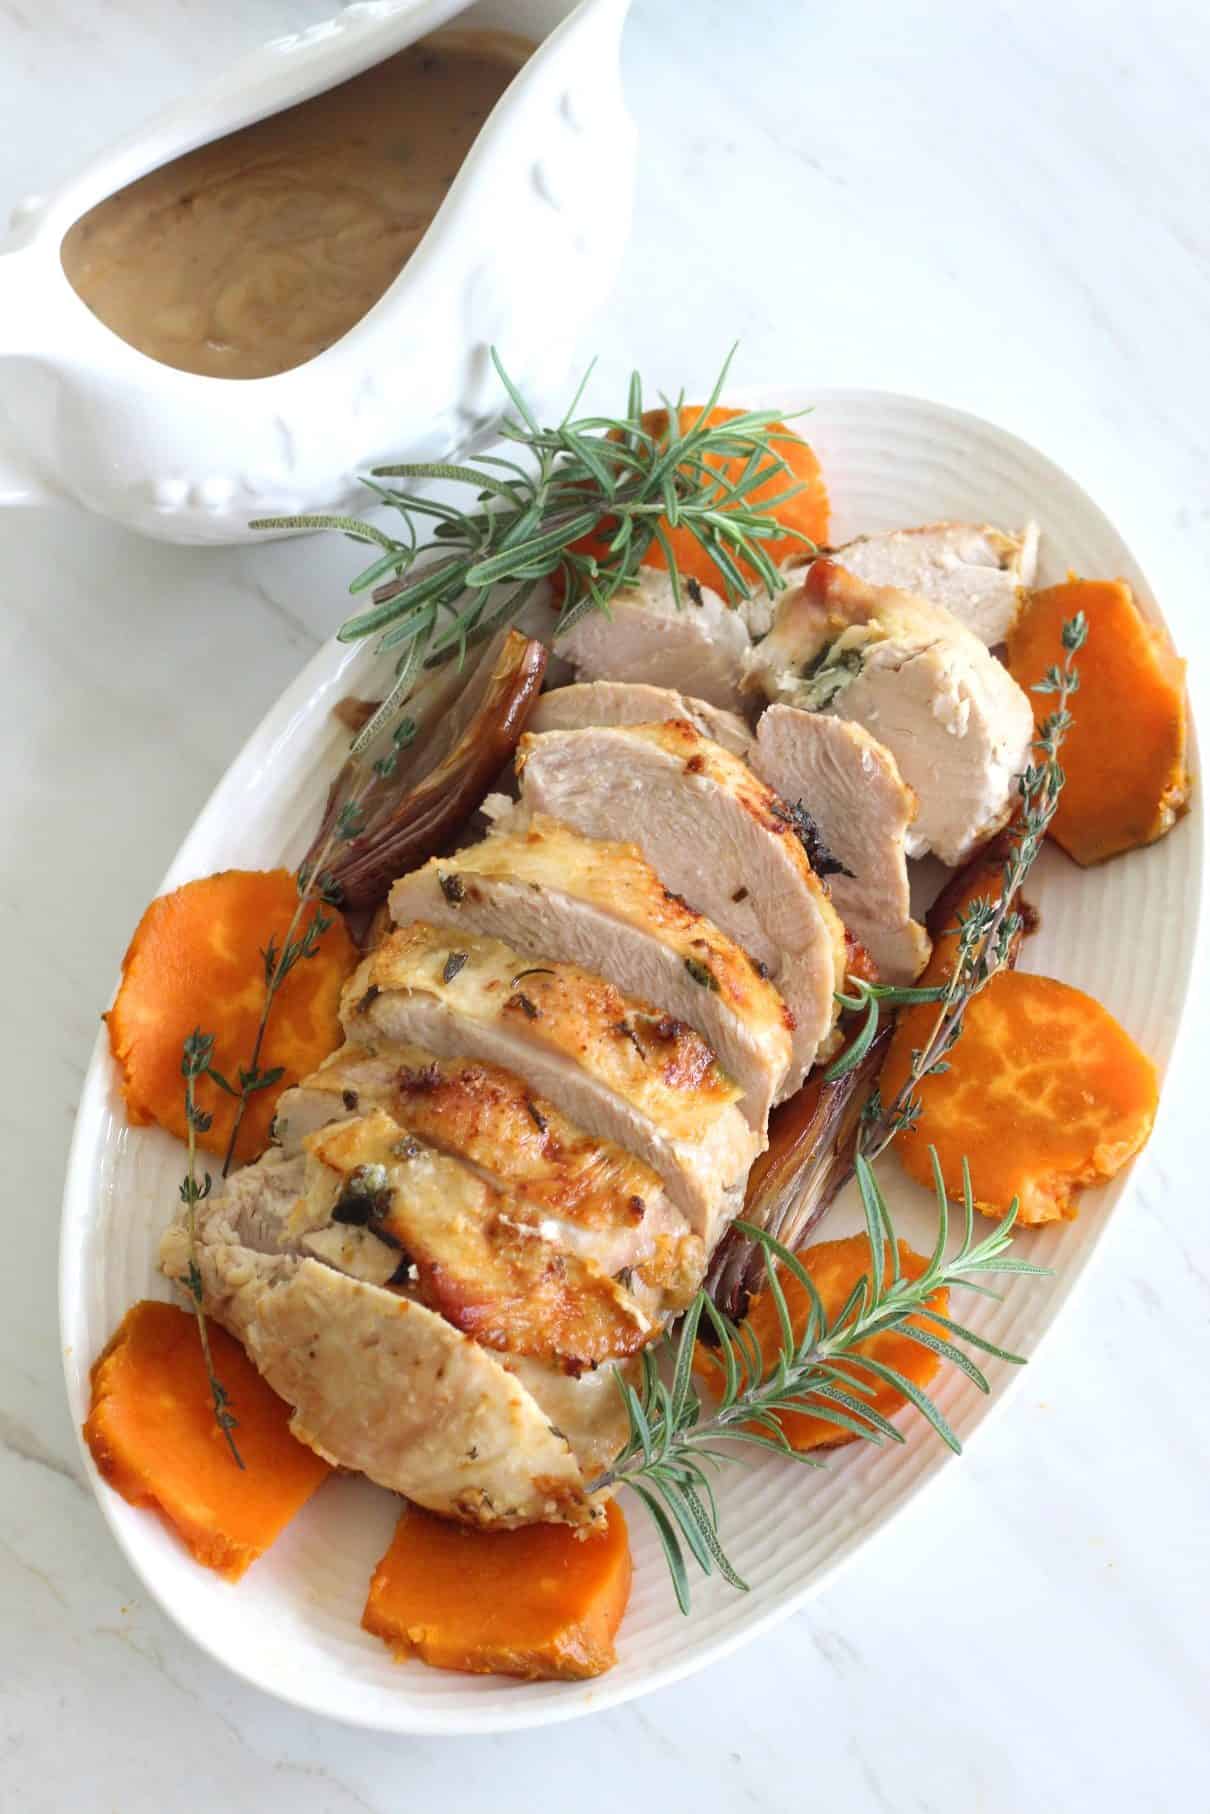 A platter with sliced roasted turkey, fresh herbs, sliced sweet potato and a side of gravy on the side. 